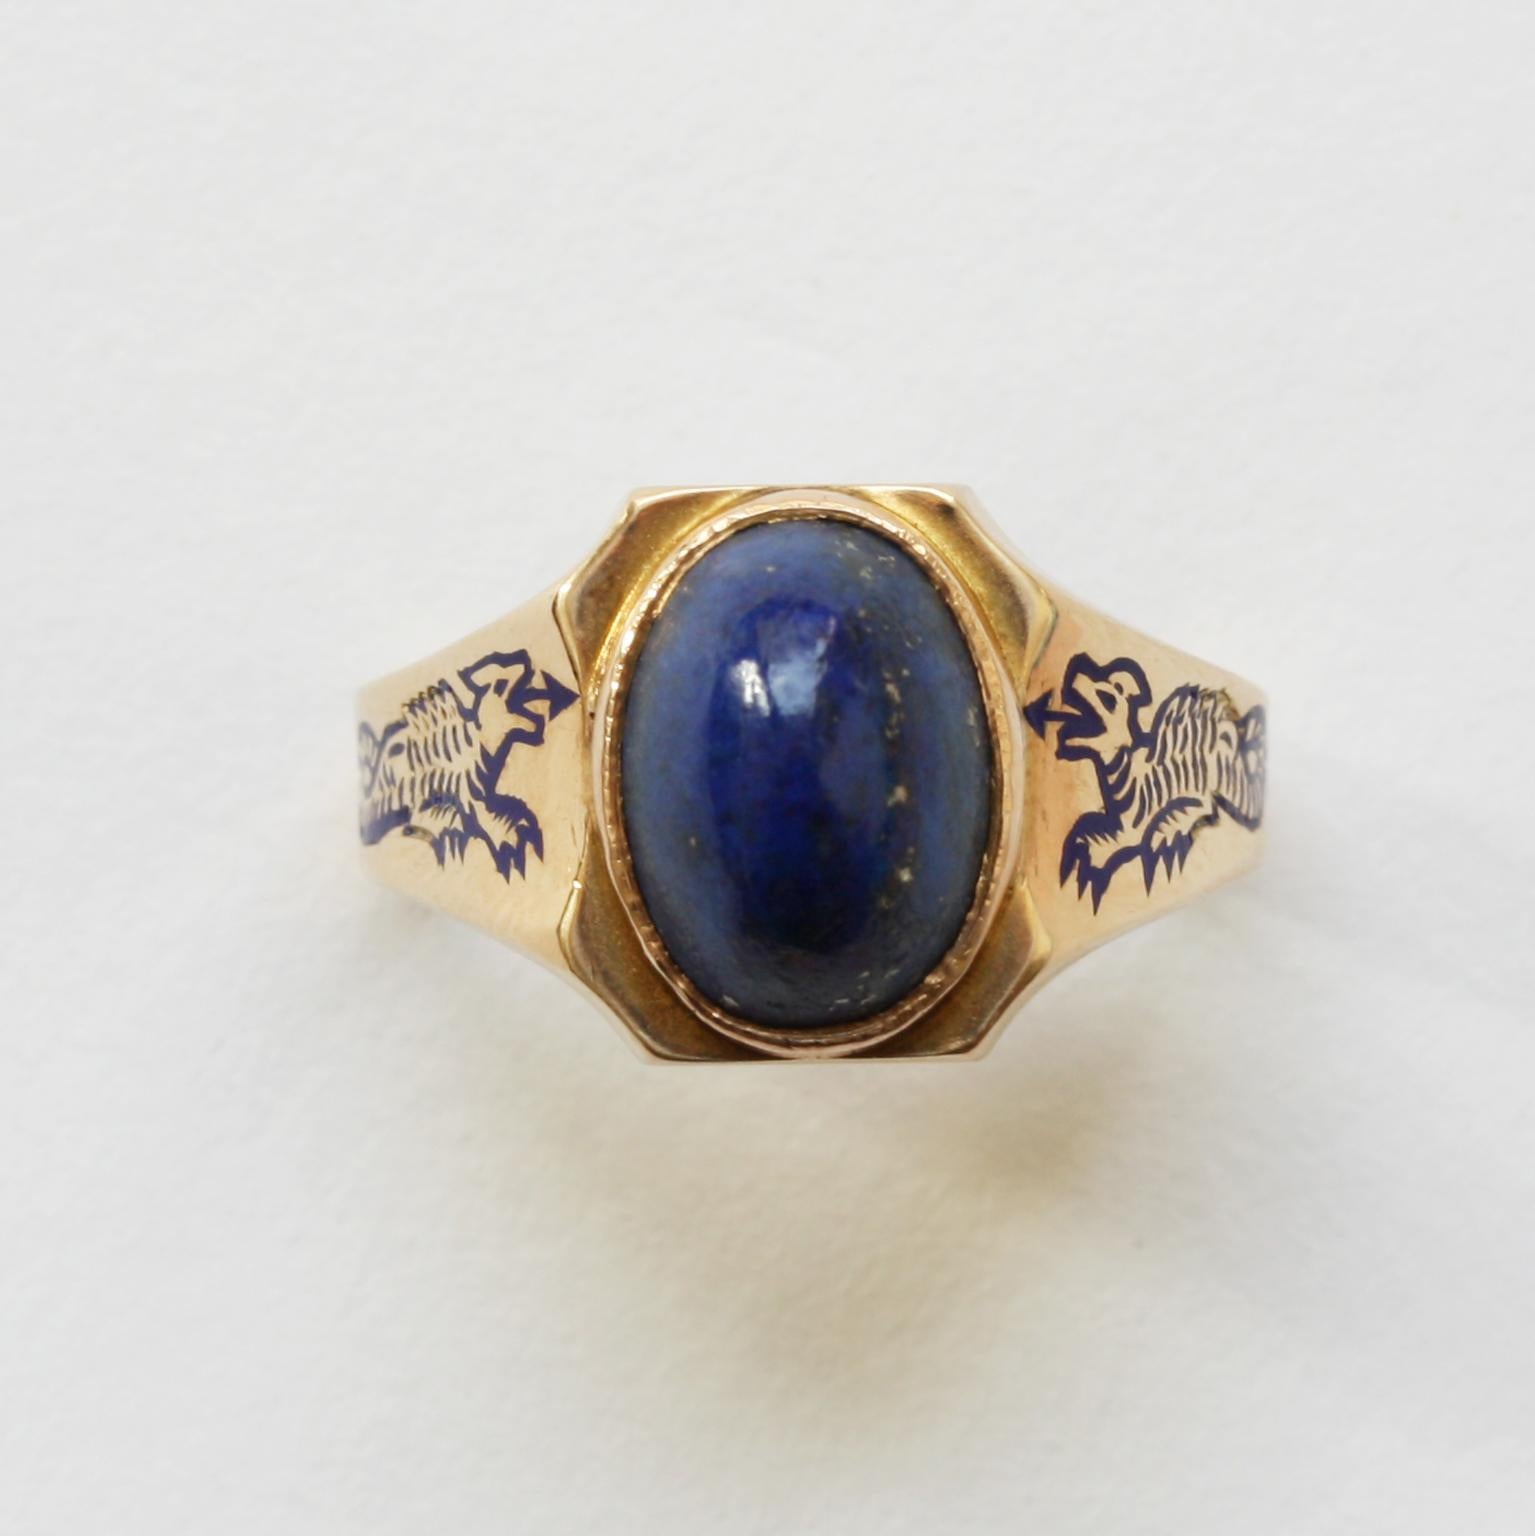 A 14 carat gold Art Deco ring set with a high oval cabochon cut lapis with pretty little flakes of pyrite on each side in the shank is a little dragon in blue enamel, circa 1920, American.

ring size: 16.25 – 16.5 mm. / 5 ½ US
weight: 5.72